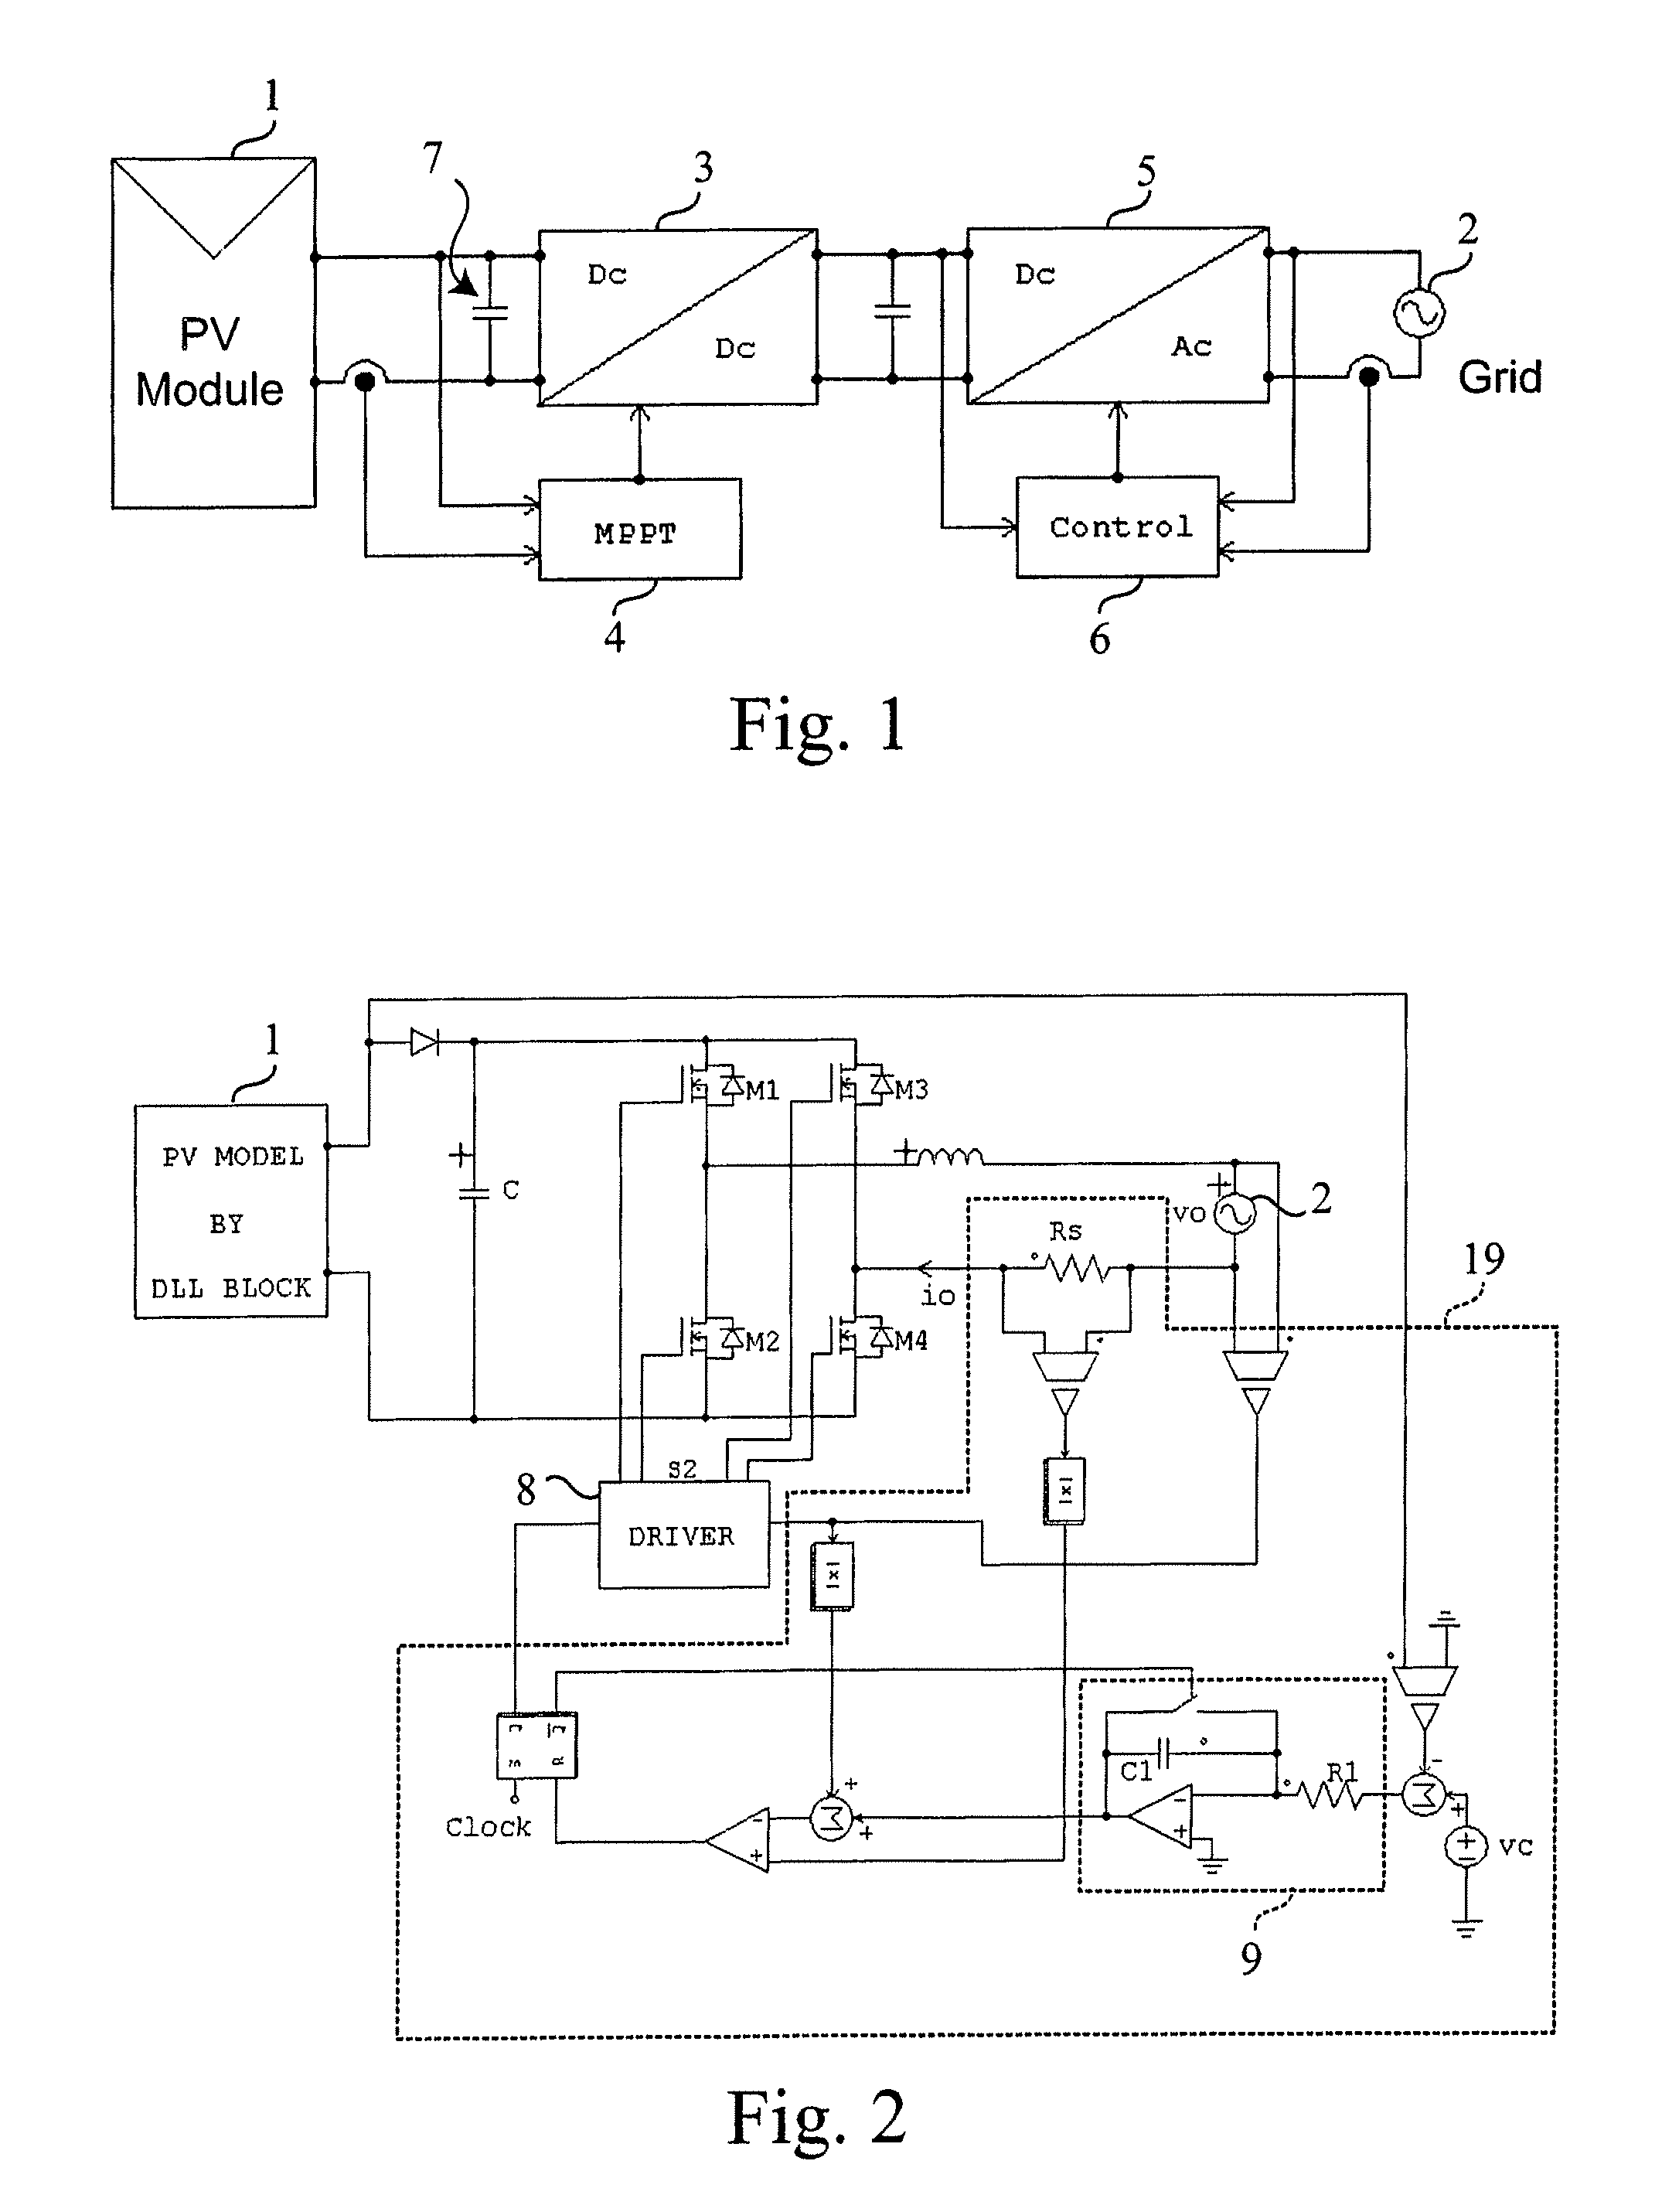 Single stage inverter device, and related controlling method, for converters of power from energy sources, in particular photovoltaic sources